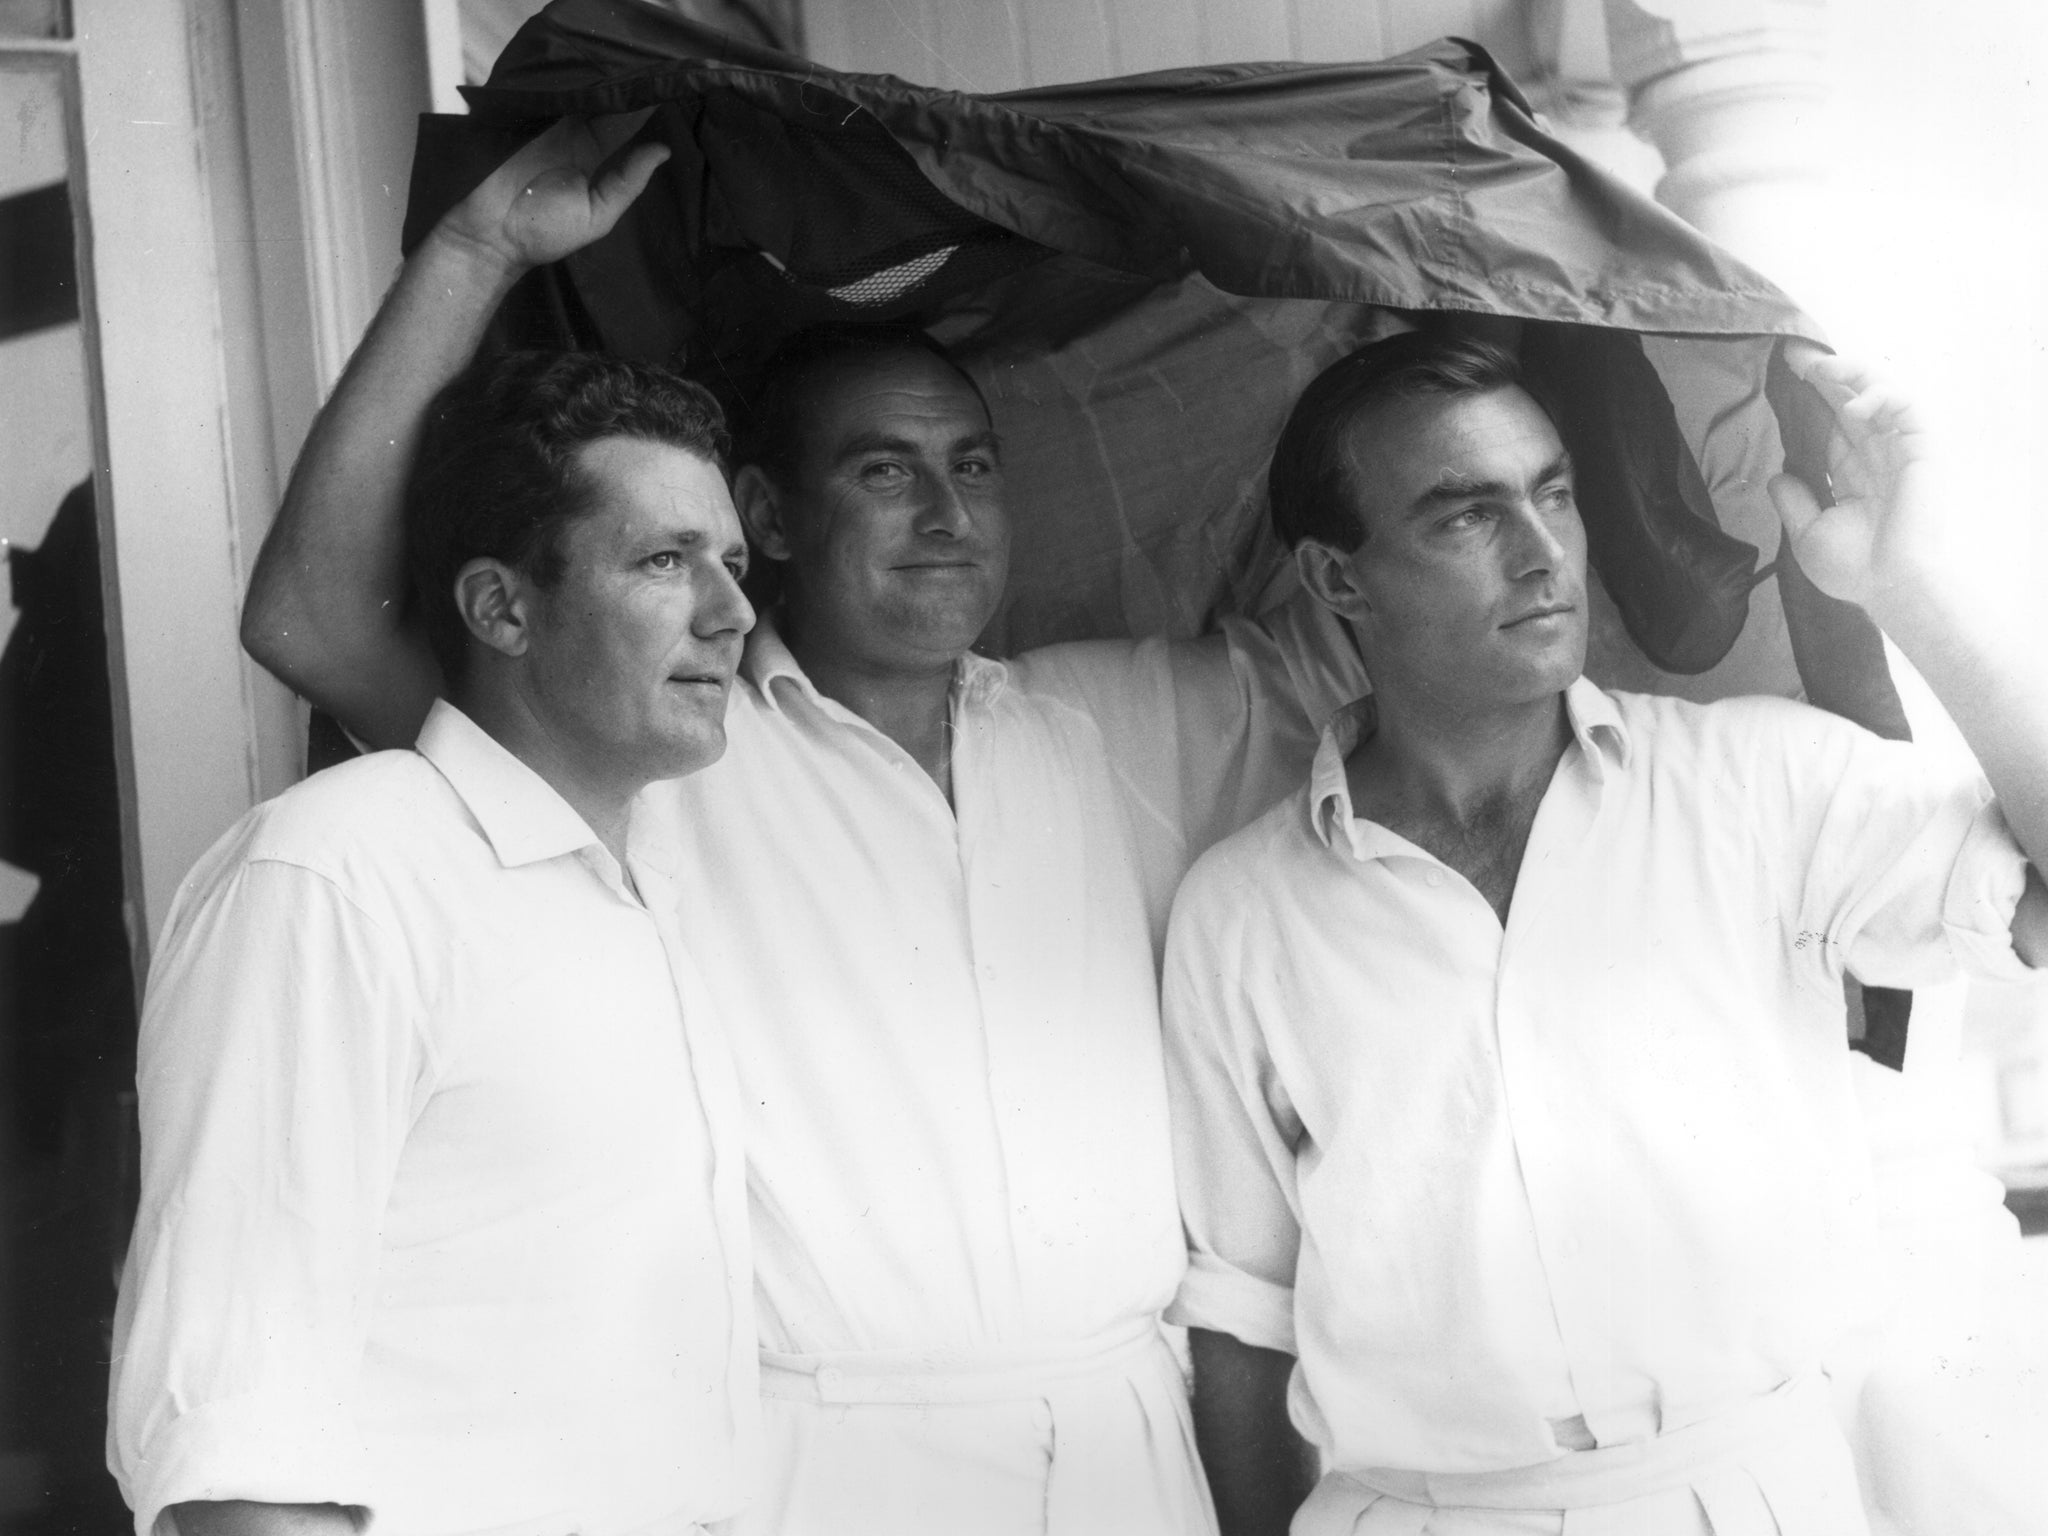 England test captain John Edrich and two century-making batsmen Phil Sharpe and Ray Illingworth take shelter as rain stops play in the Second Test against New Zealand at Trent Bridge